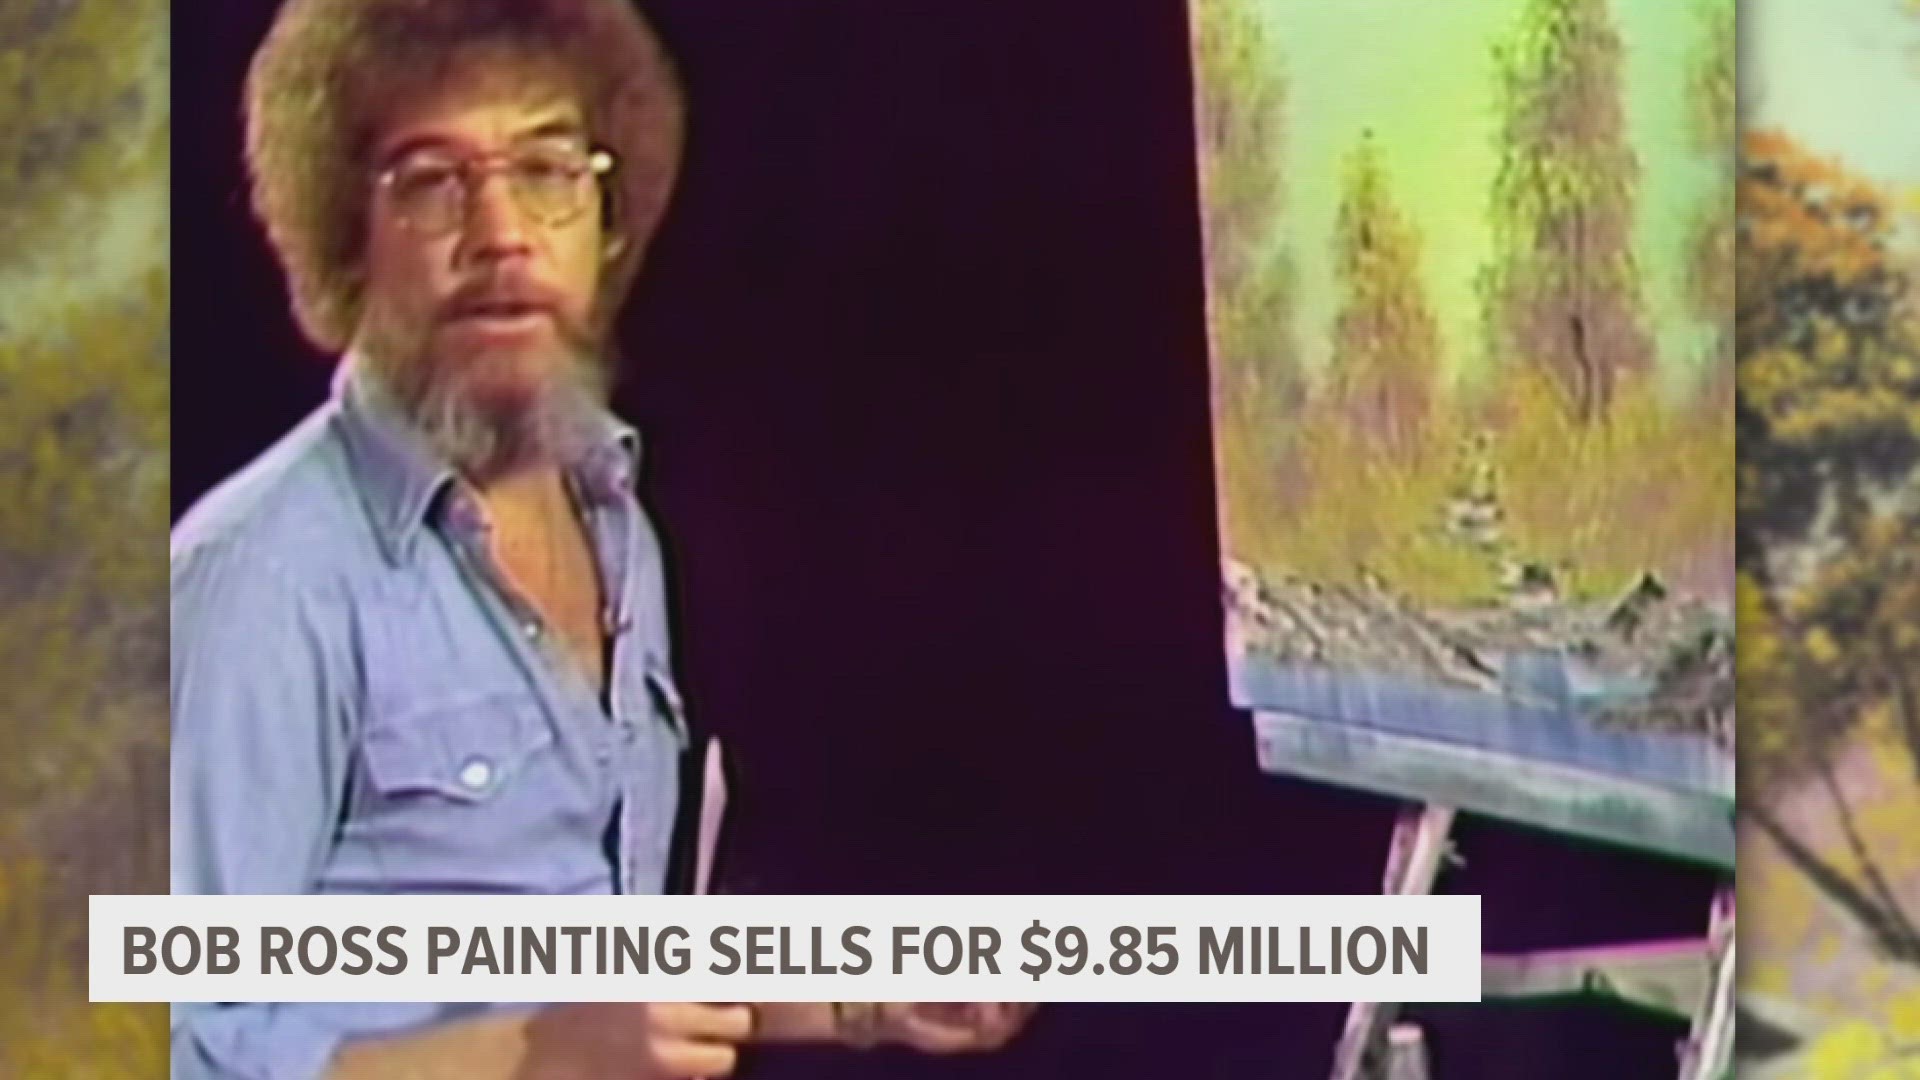 Ross' paintings are hard to get and are expensive, but none has sold for nearly that much.